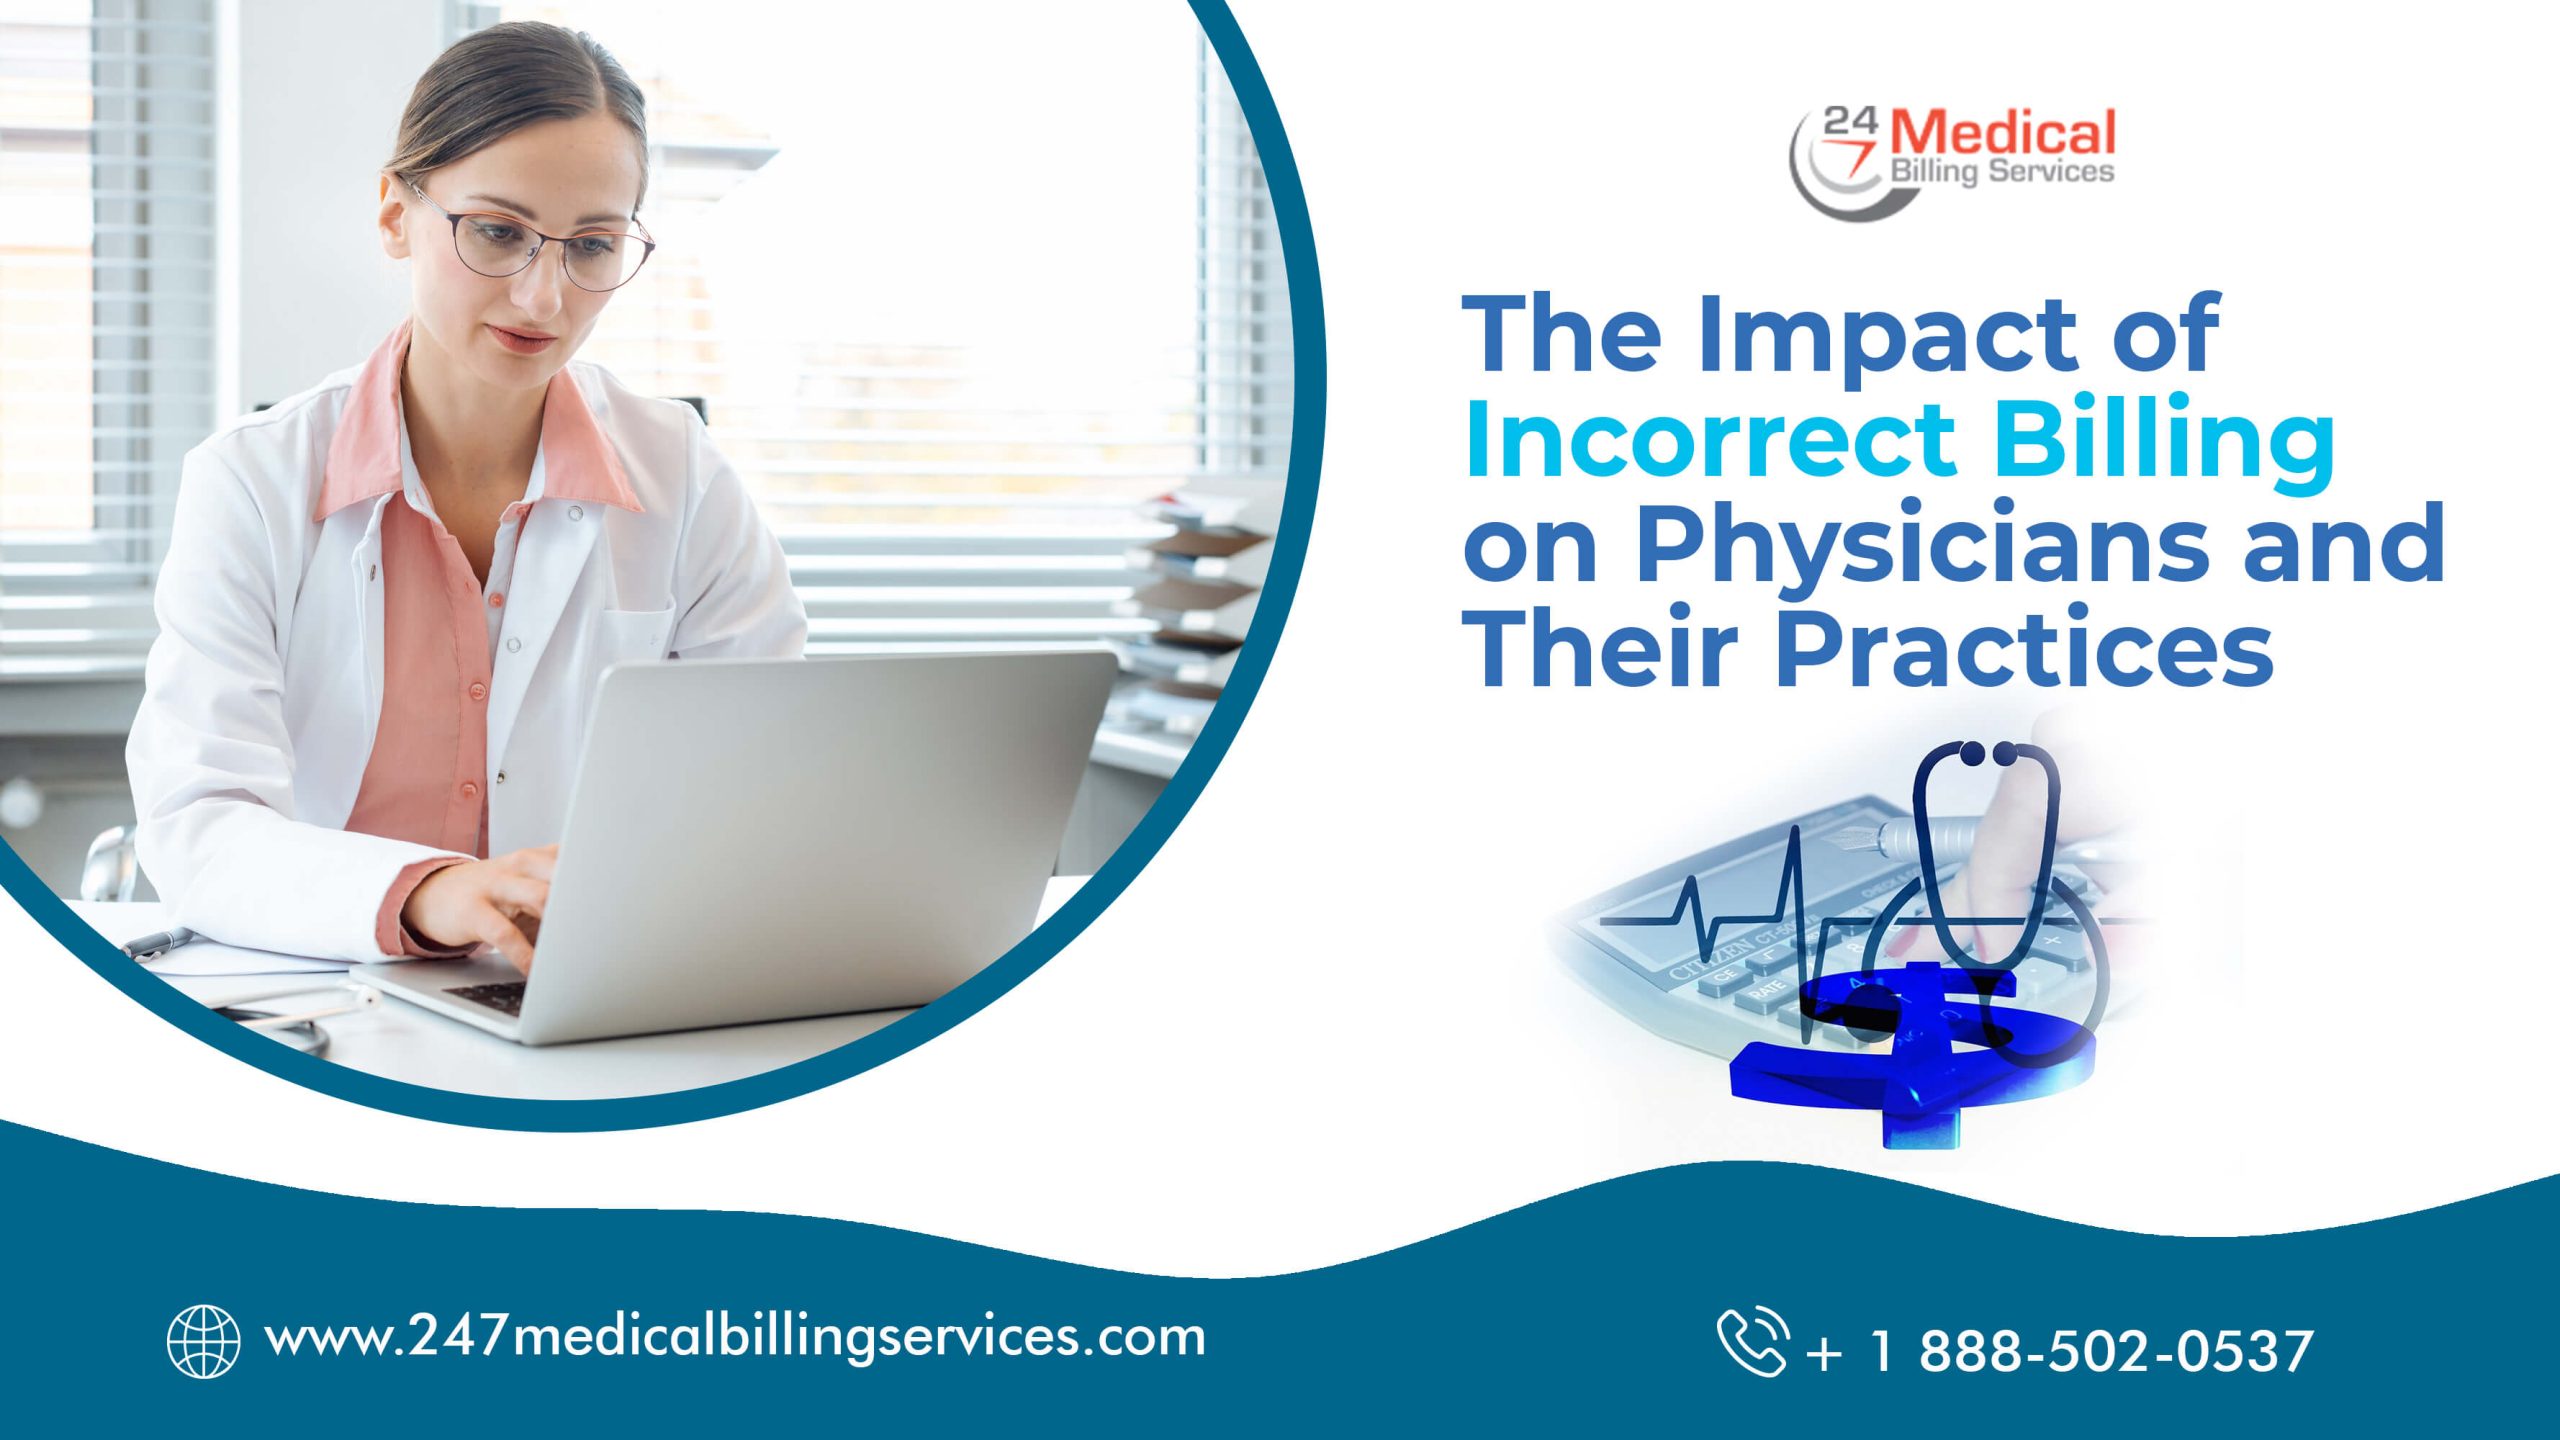  The Impact of Incorrect Billing on Physicians and Their Practices